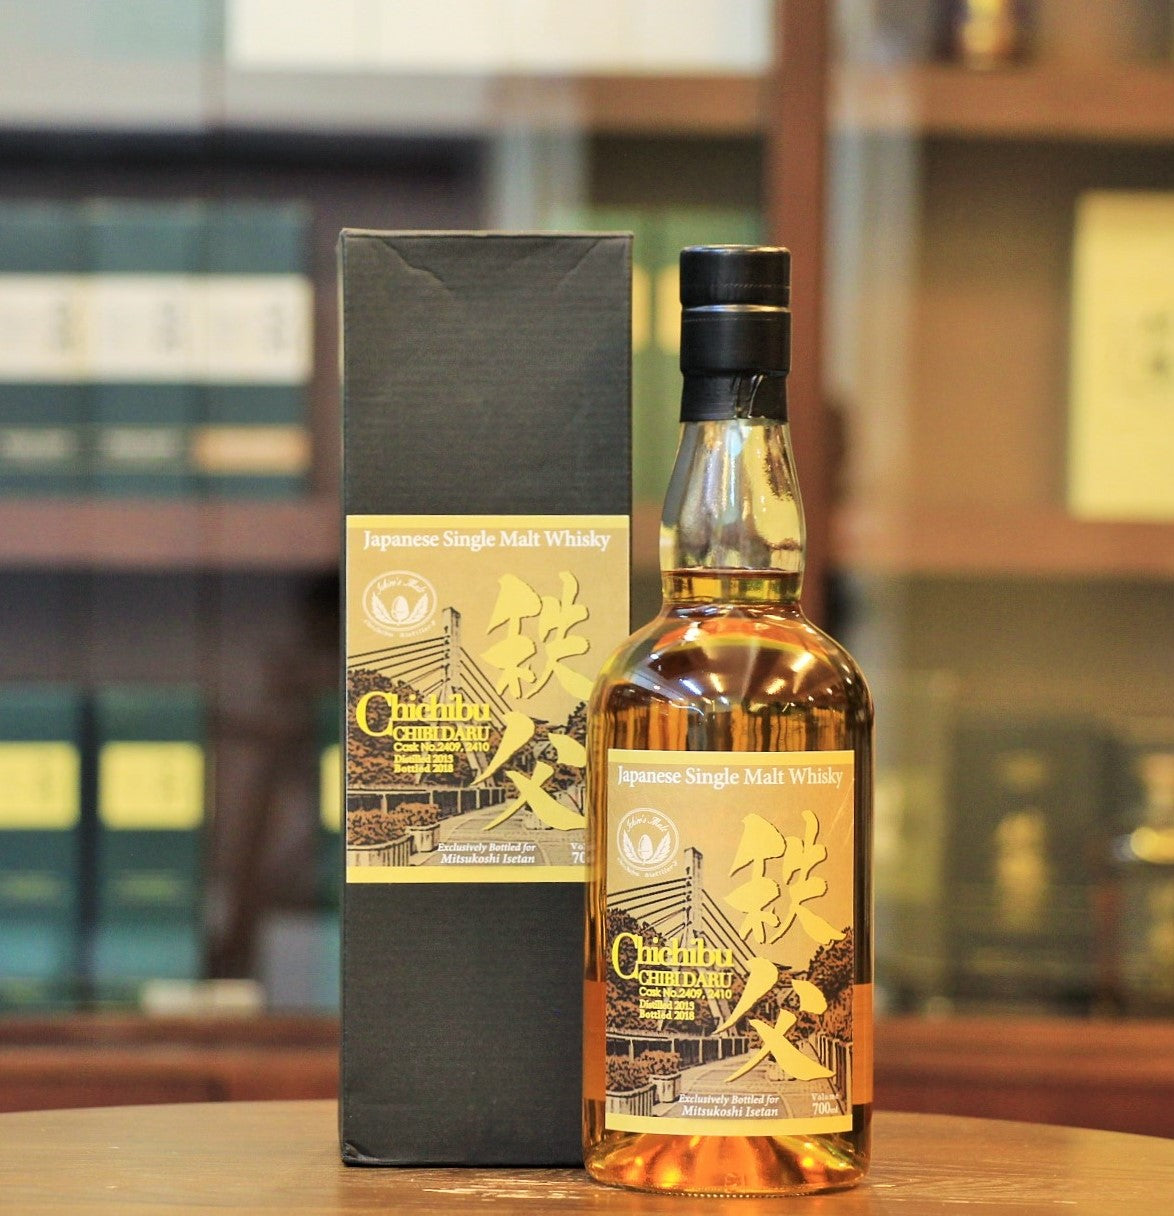 This Japanese single malt from Ichiro's Malt Chichibu distillery is a vatting of two Chibidaru Cask #2409, #2410 which distilled in 2013 and exclusively bottld for Mitsukoshi Isetan in 2018. 